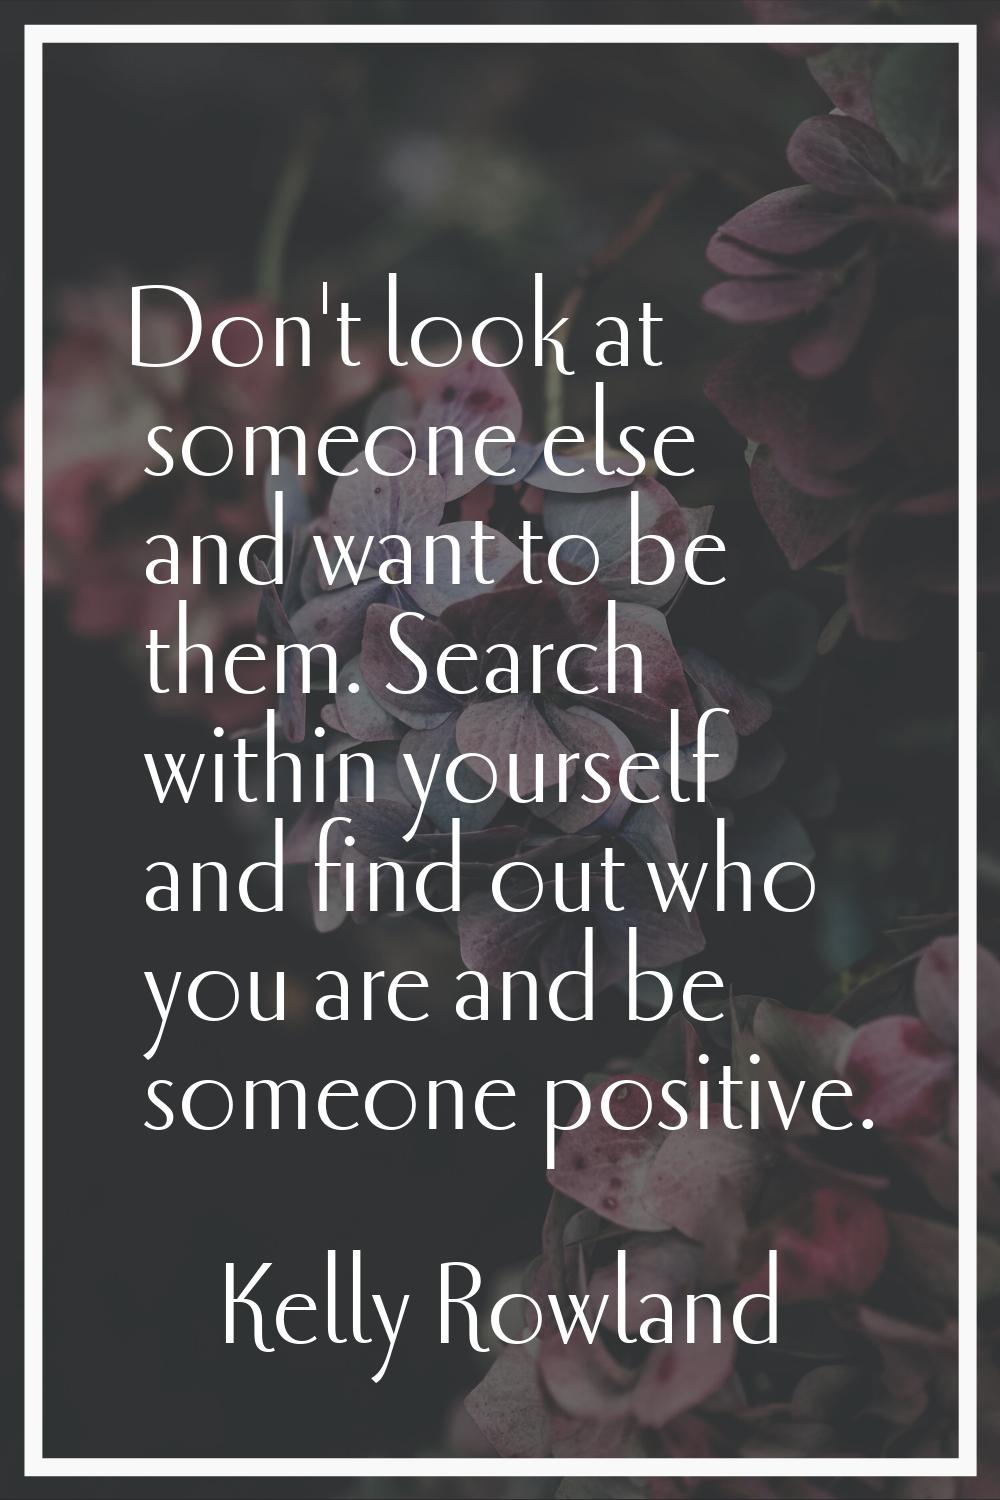 Don't look at someone else and want to be them. Search within yourself and find out who you are and